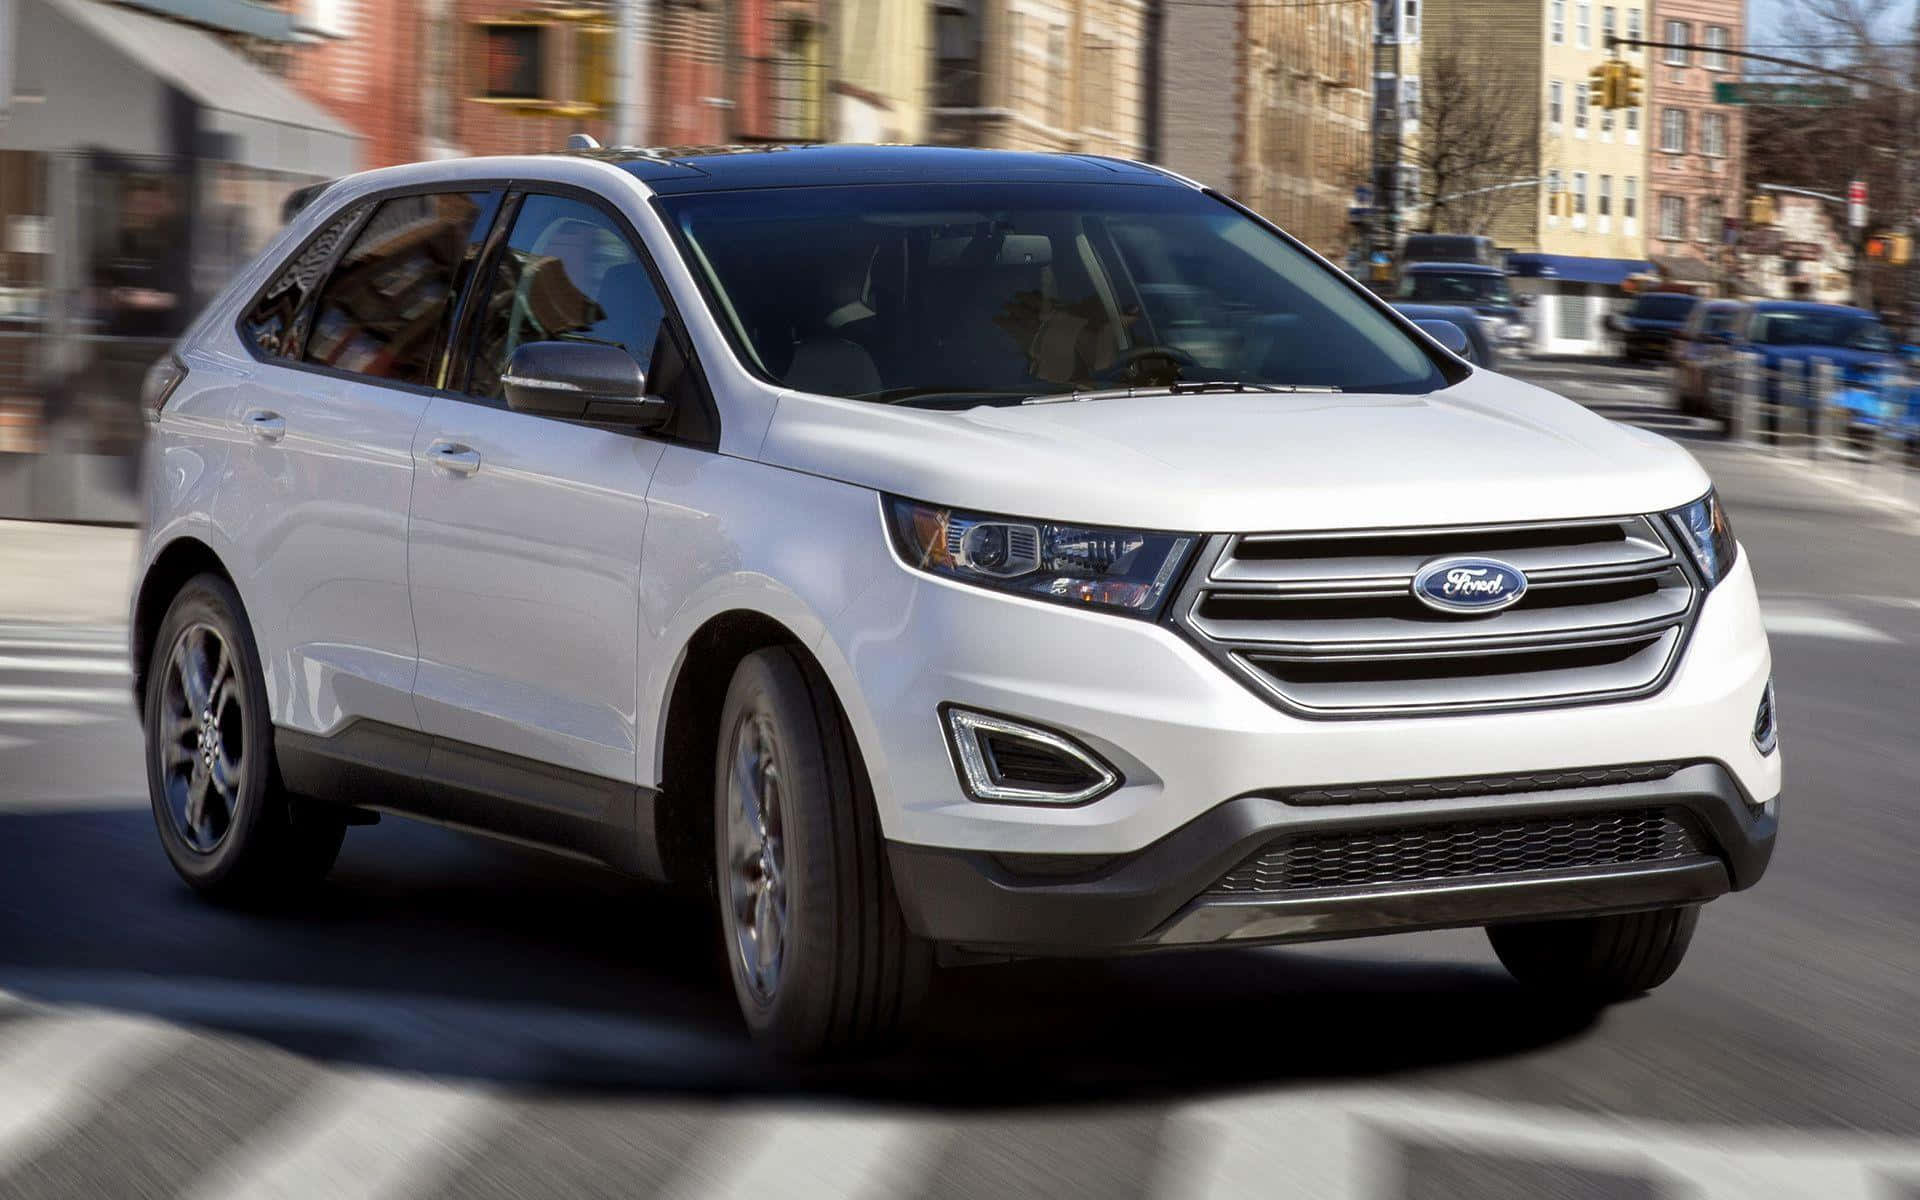 Caption: Sleek and Stylish Ford Edge on the Road Wallpaper